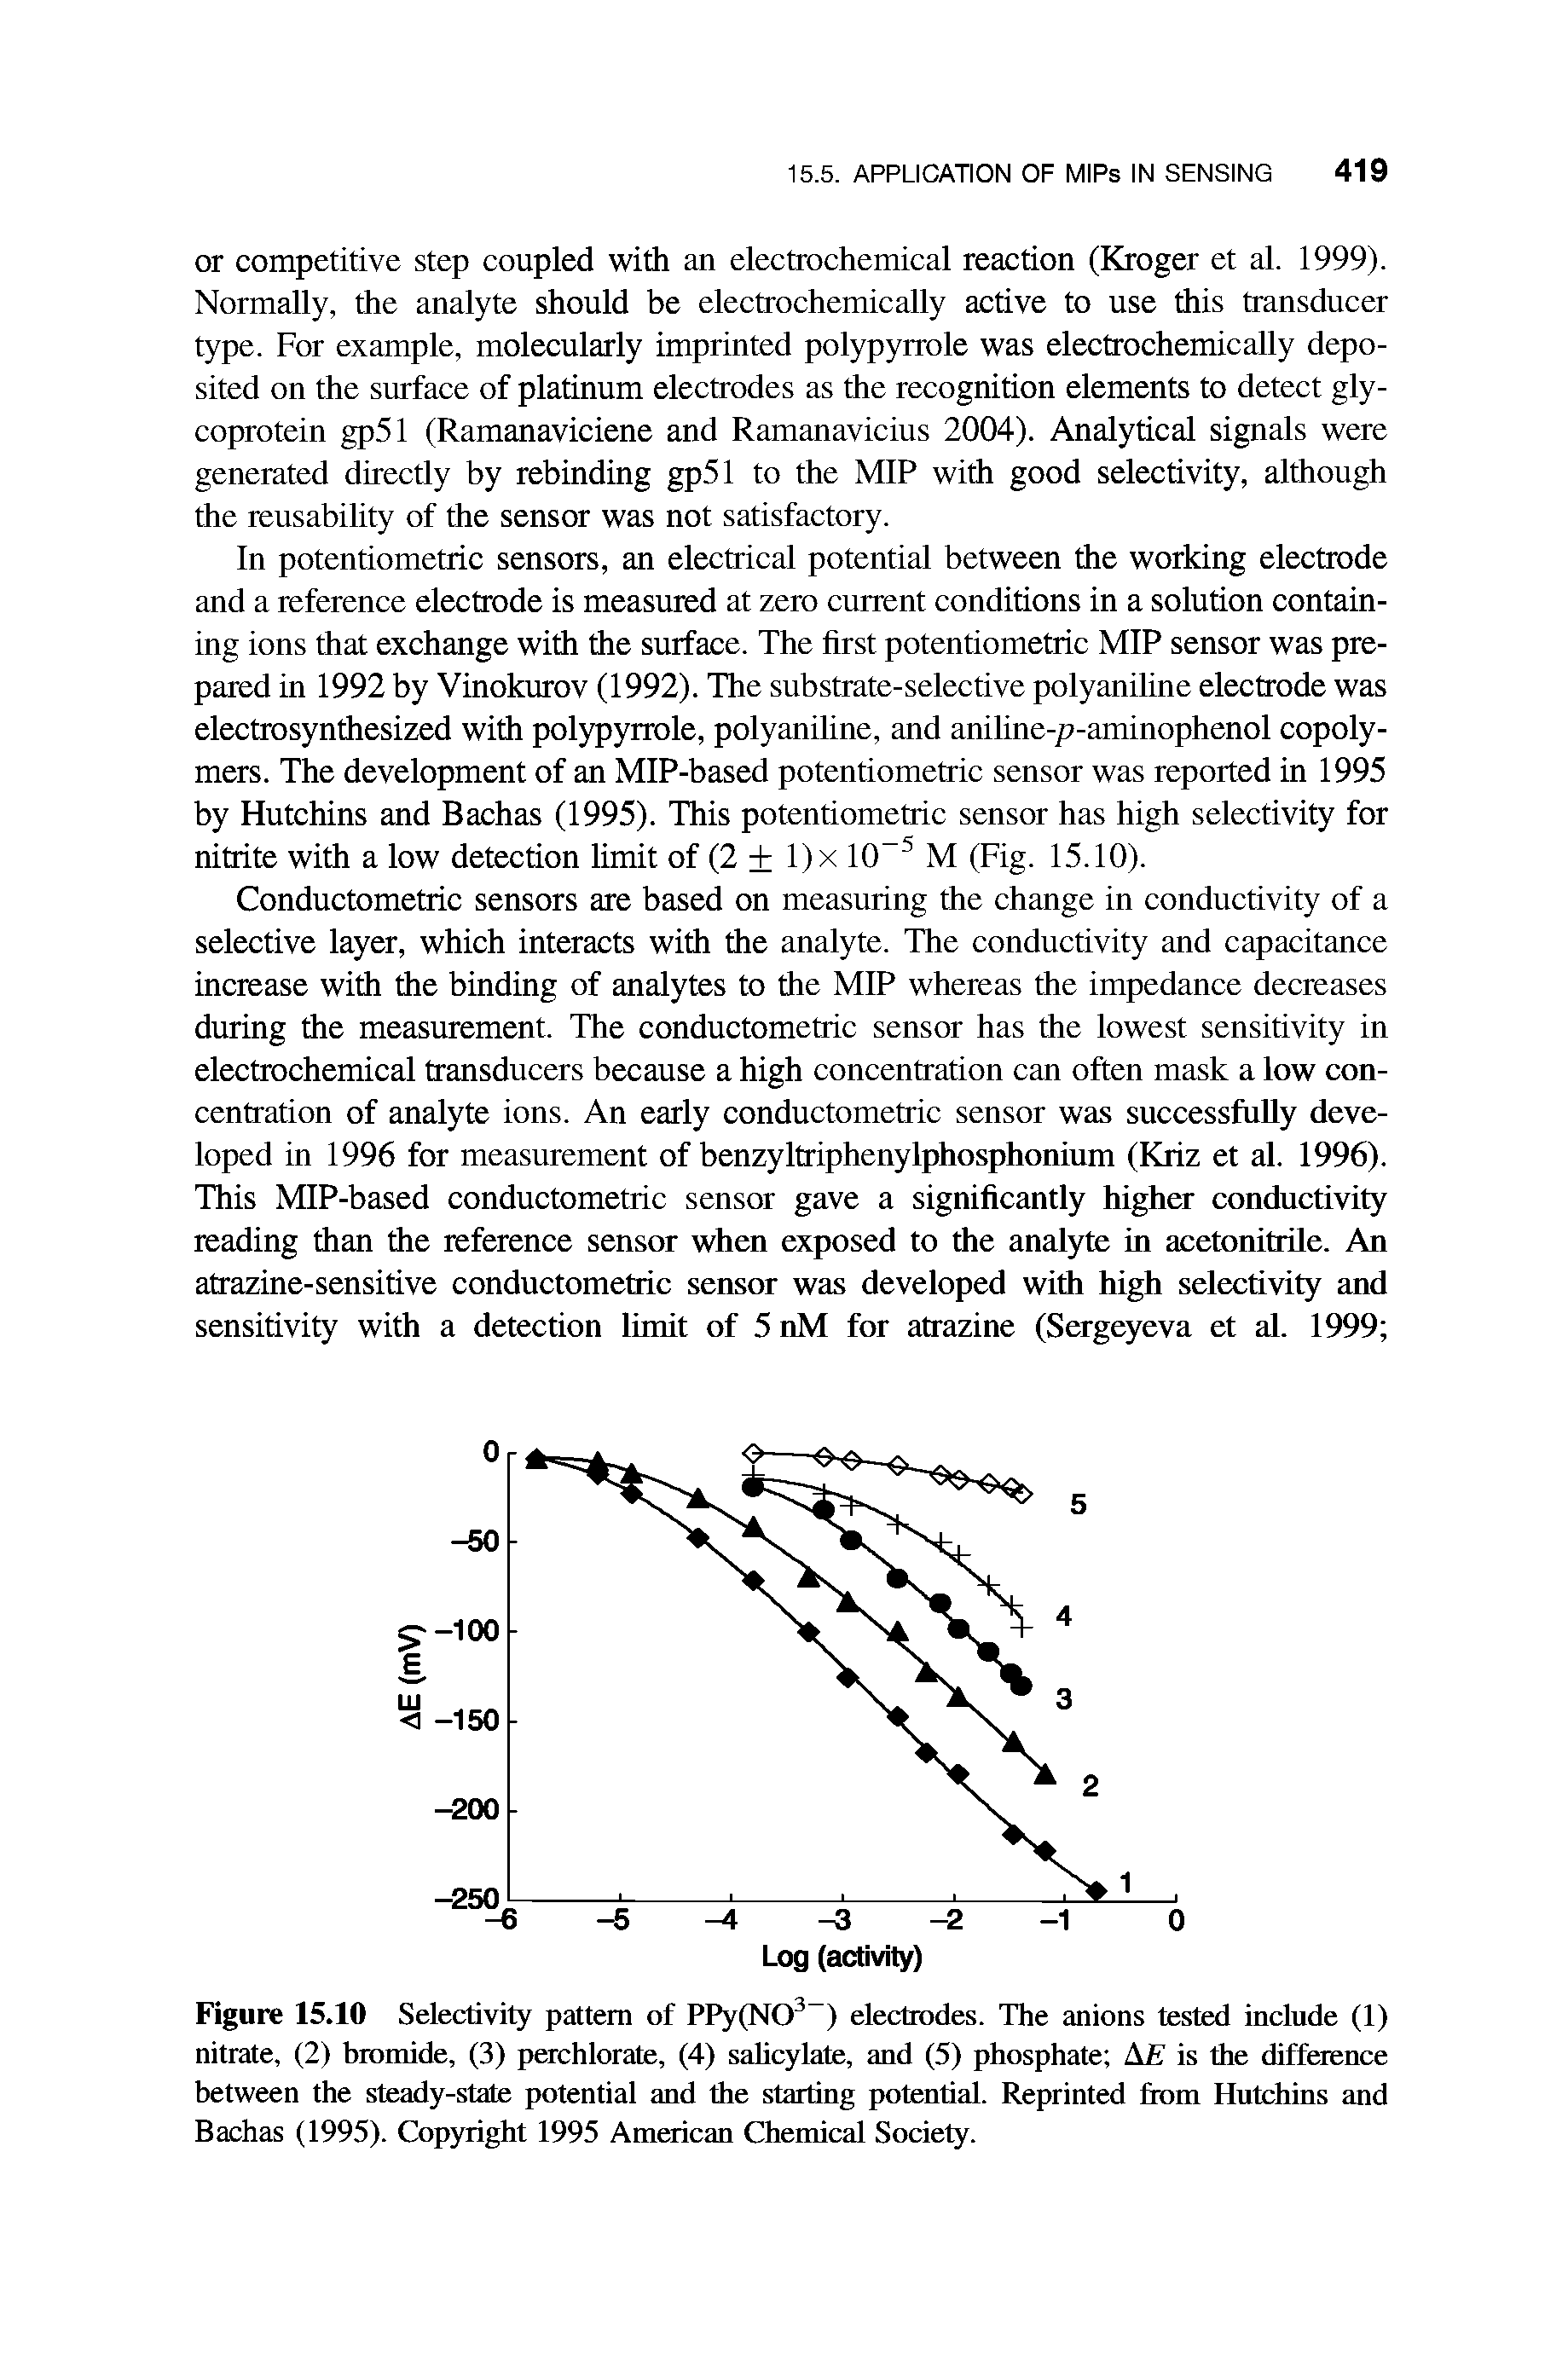 Figure 15.10 Selectivity pattern of PPy(NO ) electrodes. The anions tested include (1) nitrate, (2) bromide, (3) perchlorate, (4) sahcylate, and (5) phosphate AB is the difference between the steady-state potential and the starting potential. Reprinted from Hutchins and Bachas (1995). Copyright 1995 American Chemical Society.